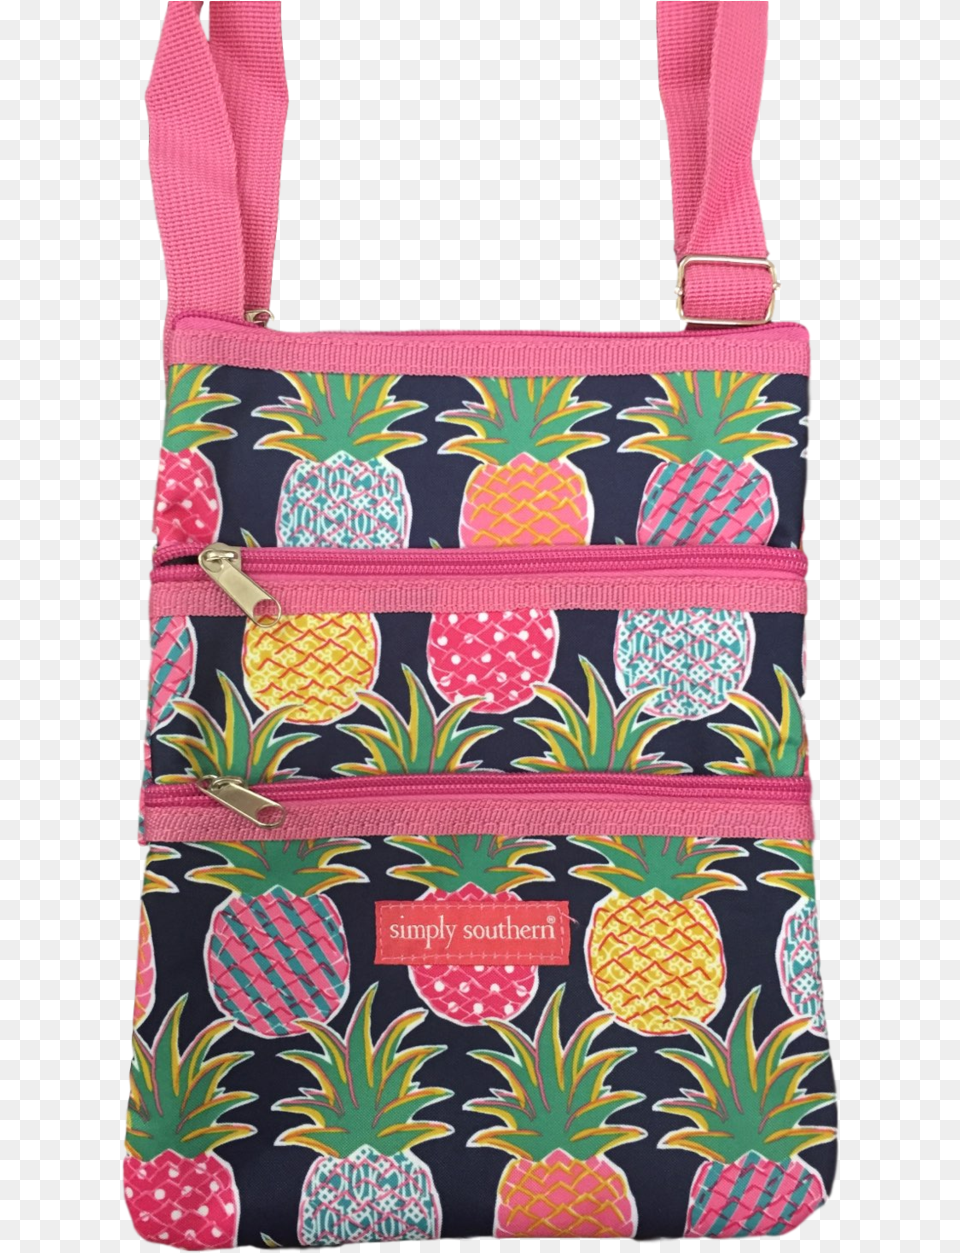 Simply Southern Tasty Crossbody Bag Simply Southern Collection Glam Bag In Pineapple Print, Accessories, Purse, Handbag, Food Free Transparent Png